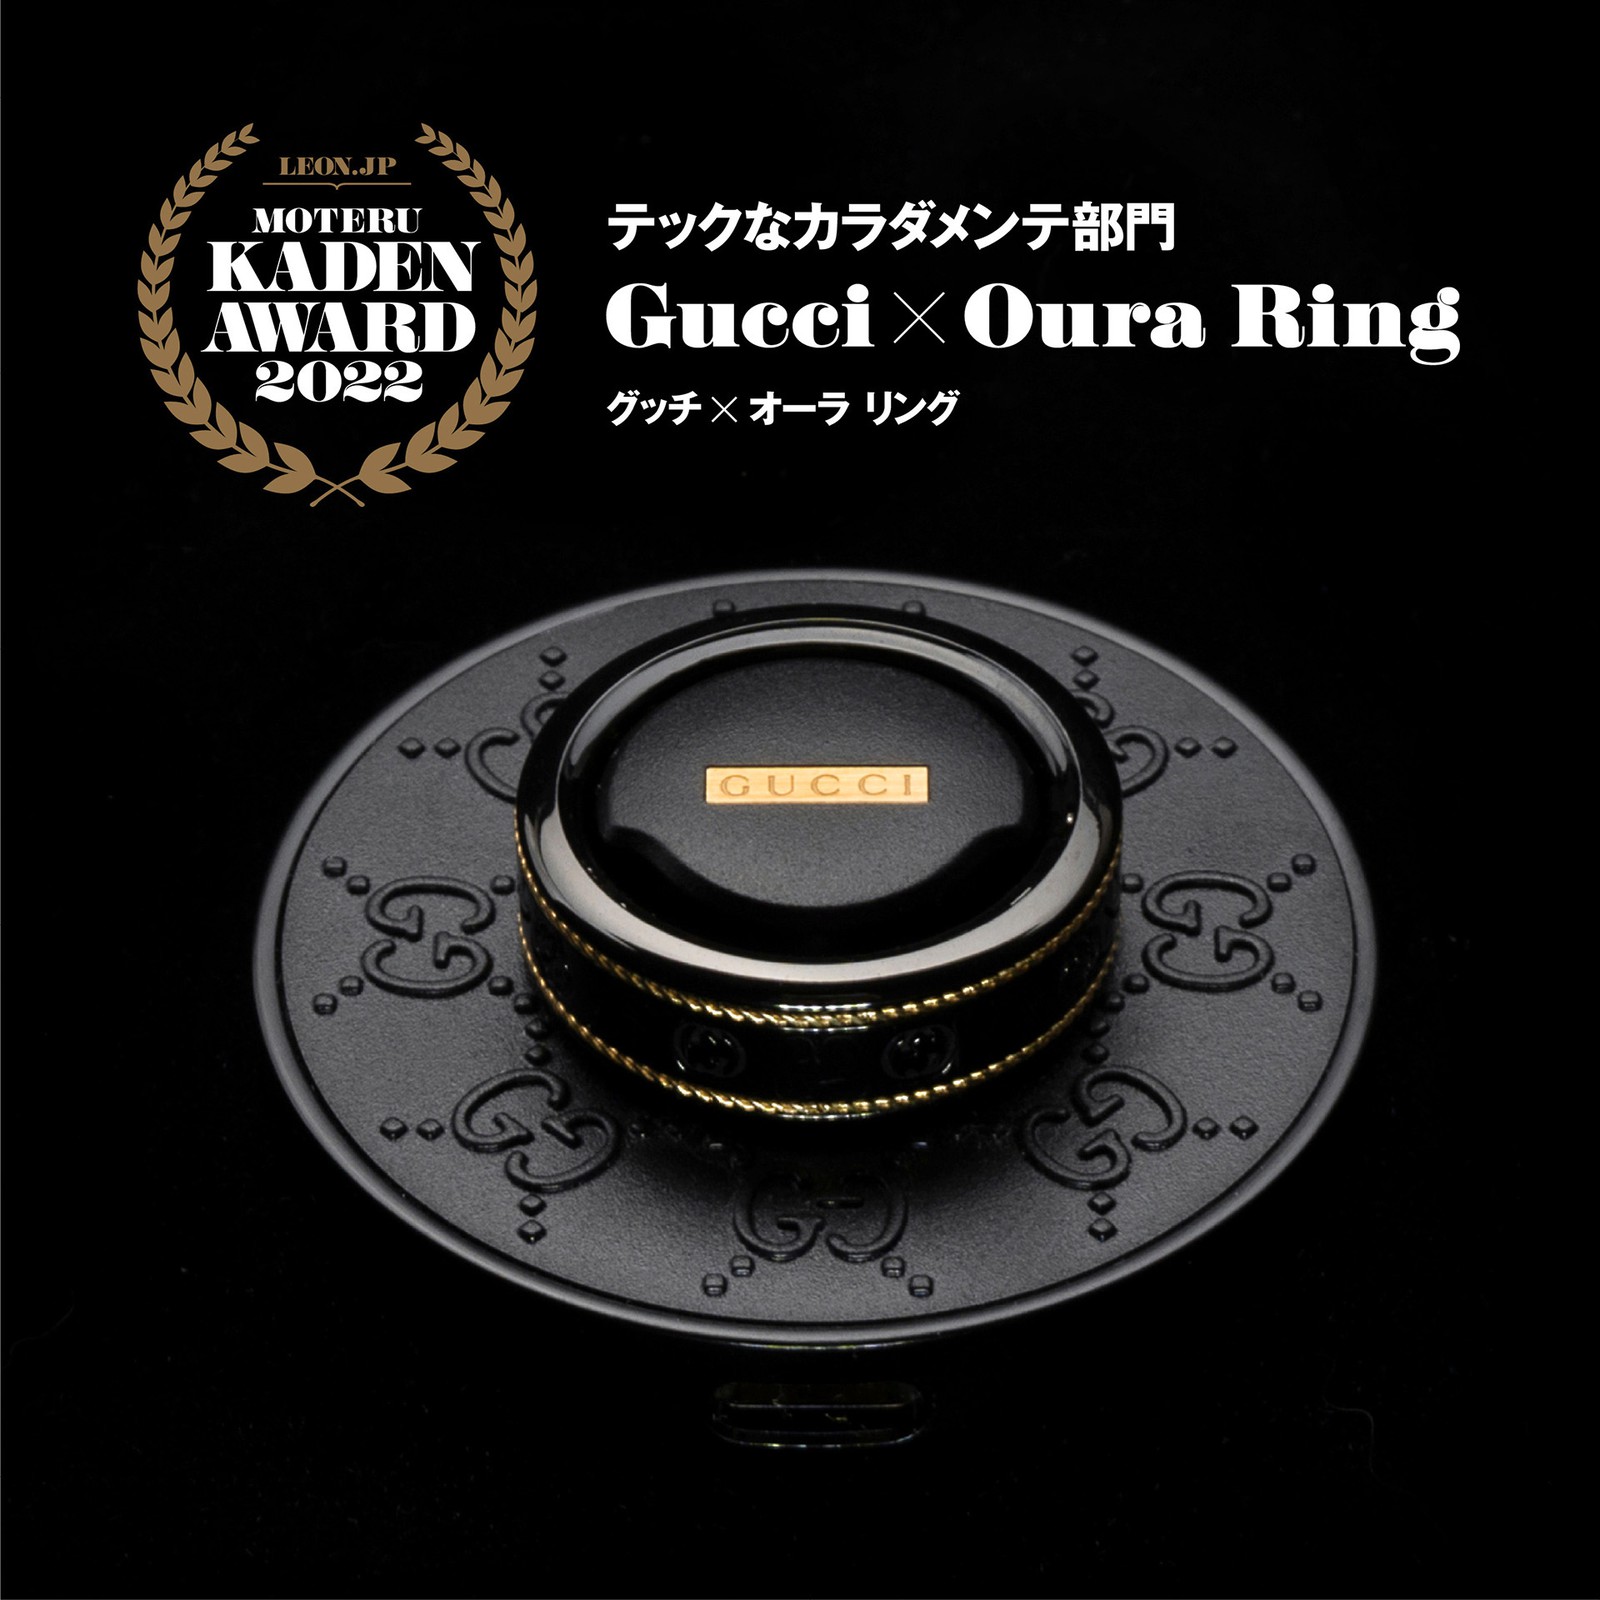 「Gucci × Oura Ring」